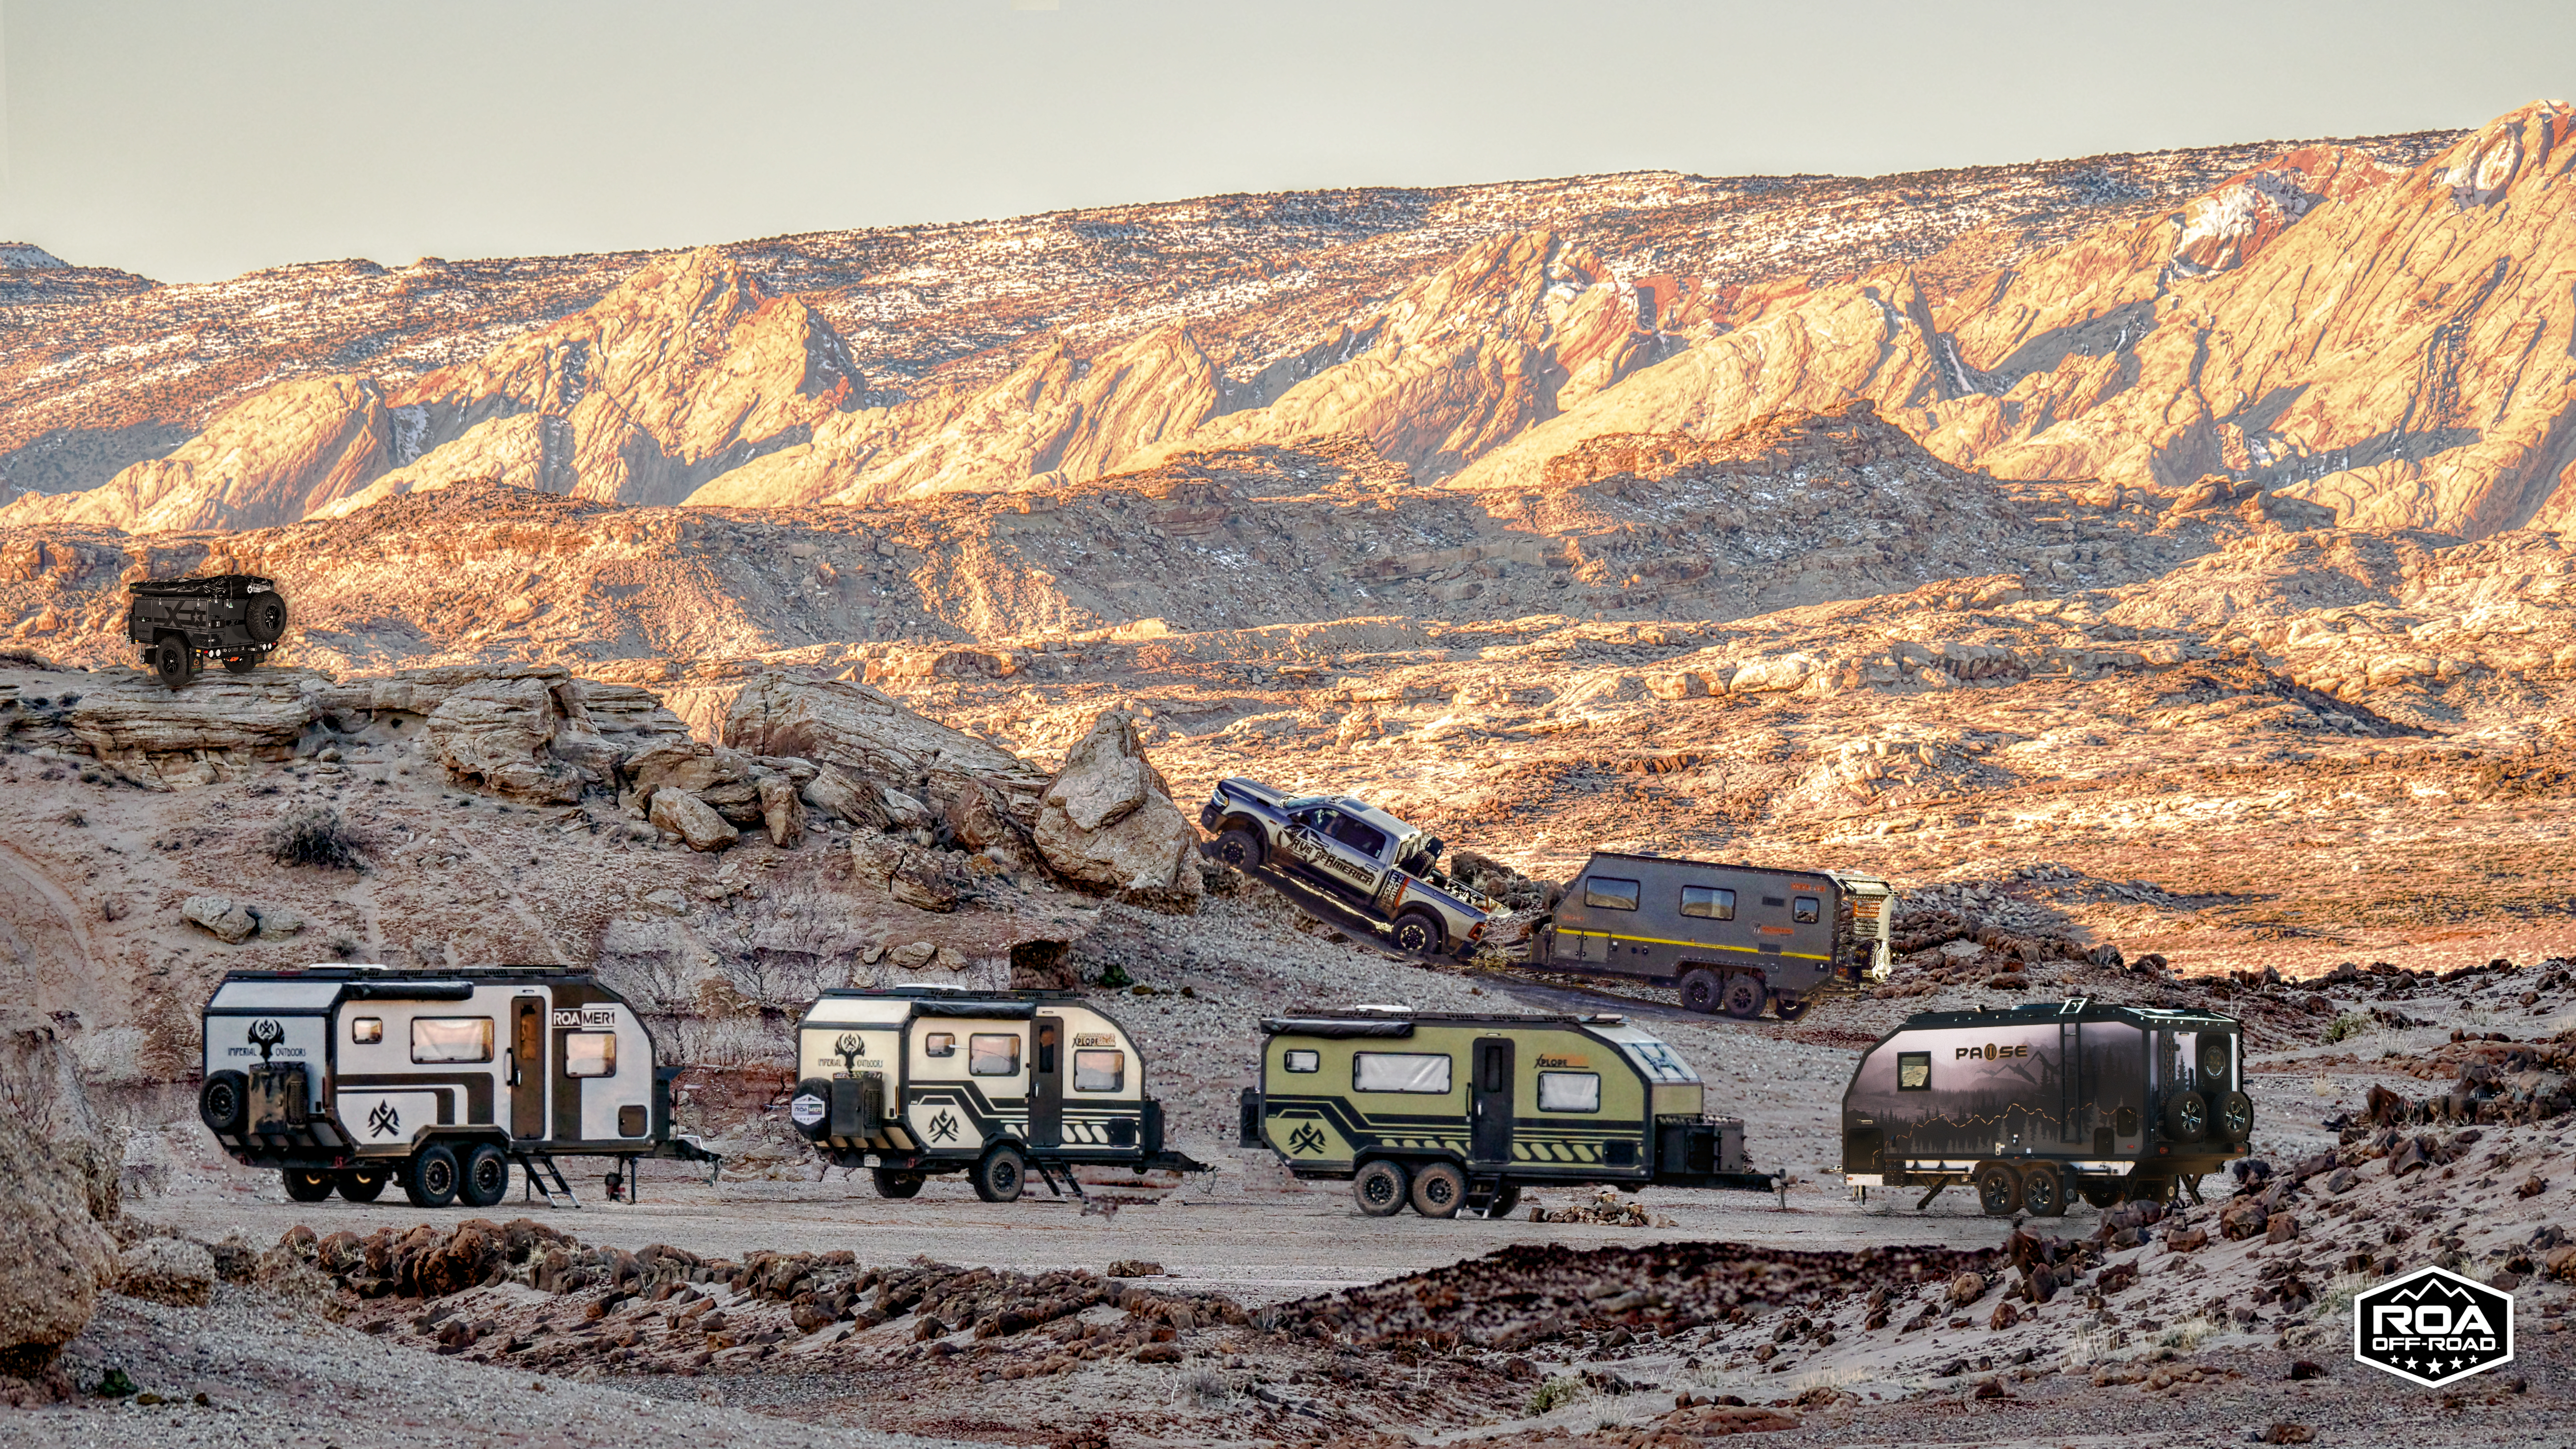 Who Has The Best Selection Of Off Road Trailers In The U.S.?